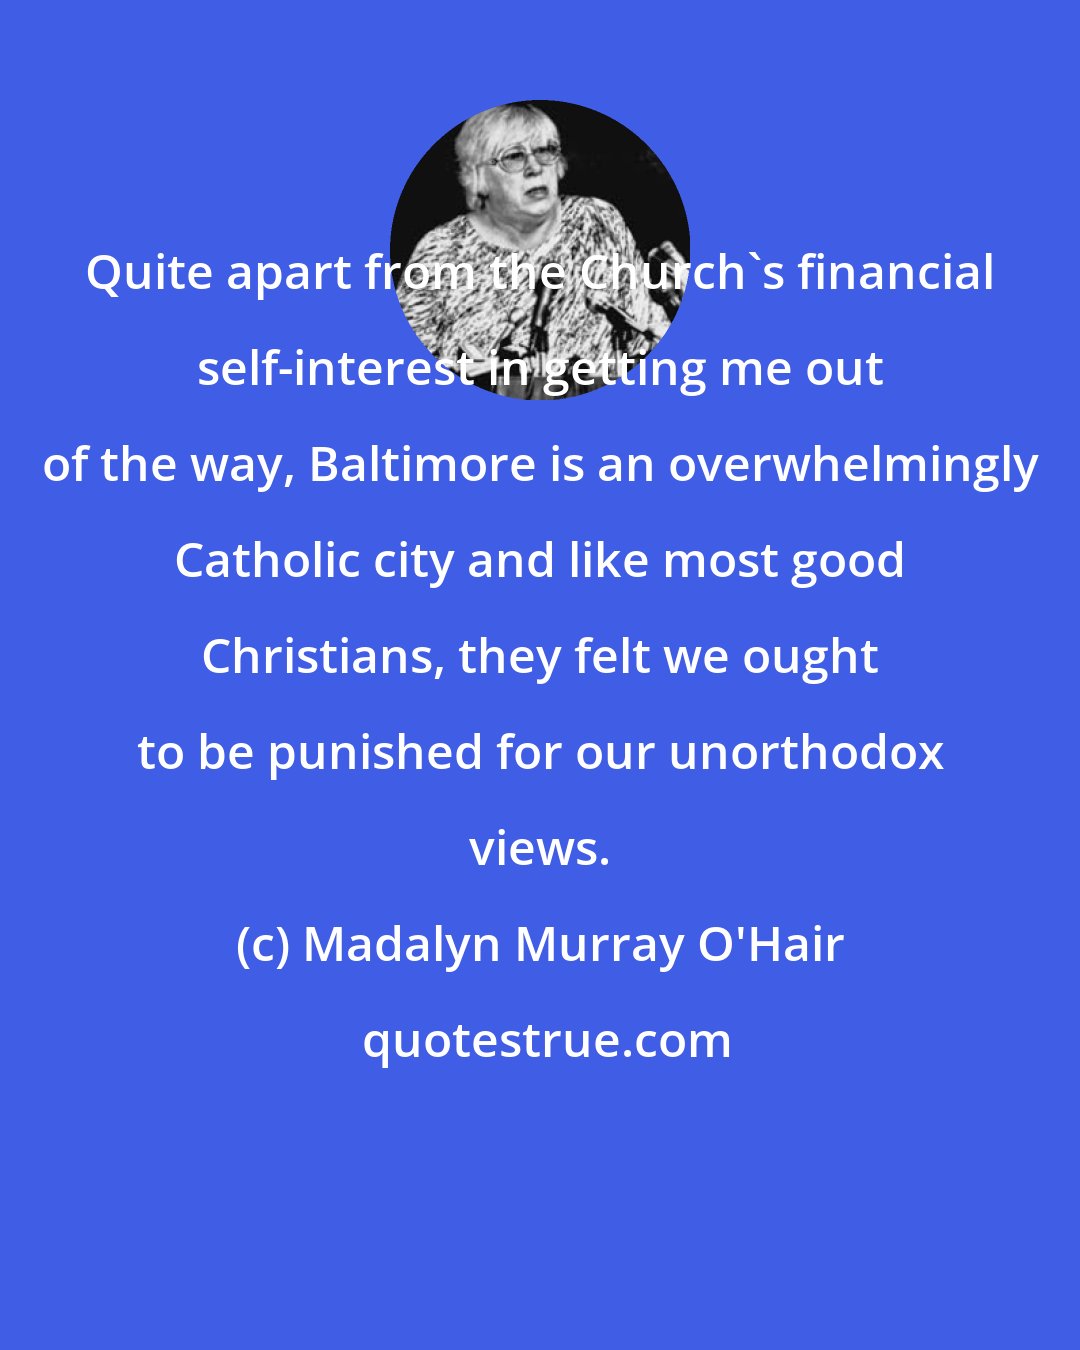 Madalyn Murray O'Hair: Quite apart from the Church's financial self-interest in getting me out of the way, Baltimore is an overwhelmingly Catholic city and like most good Christians, they felt we ought to be punished for our unorthodox views.